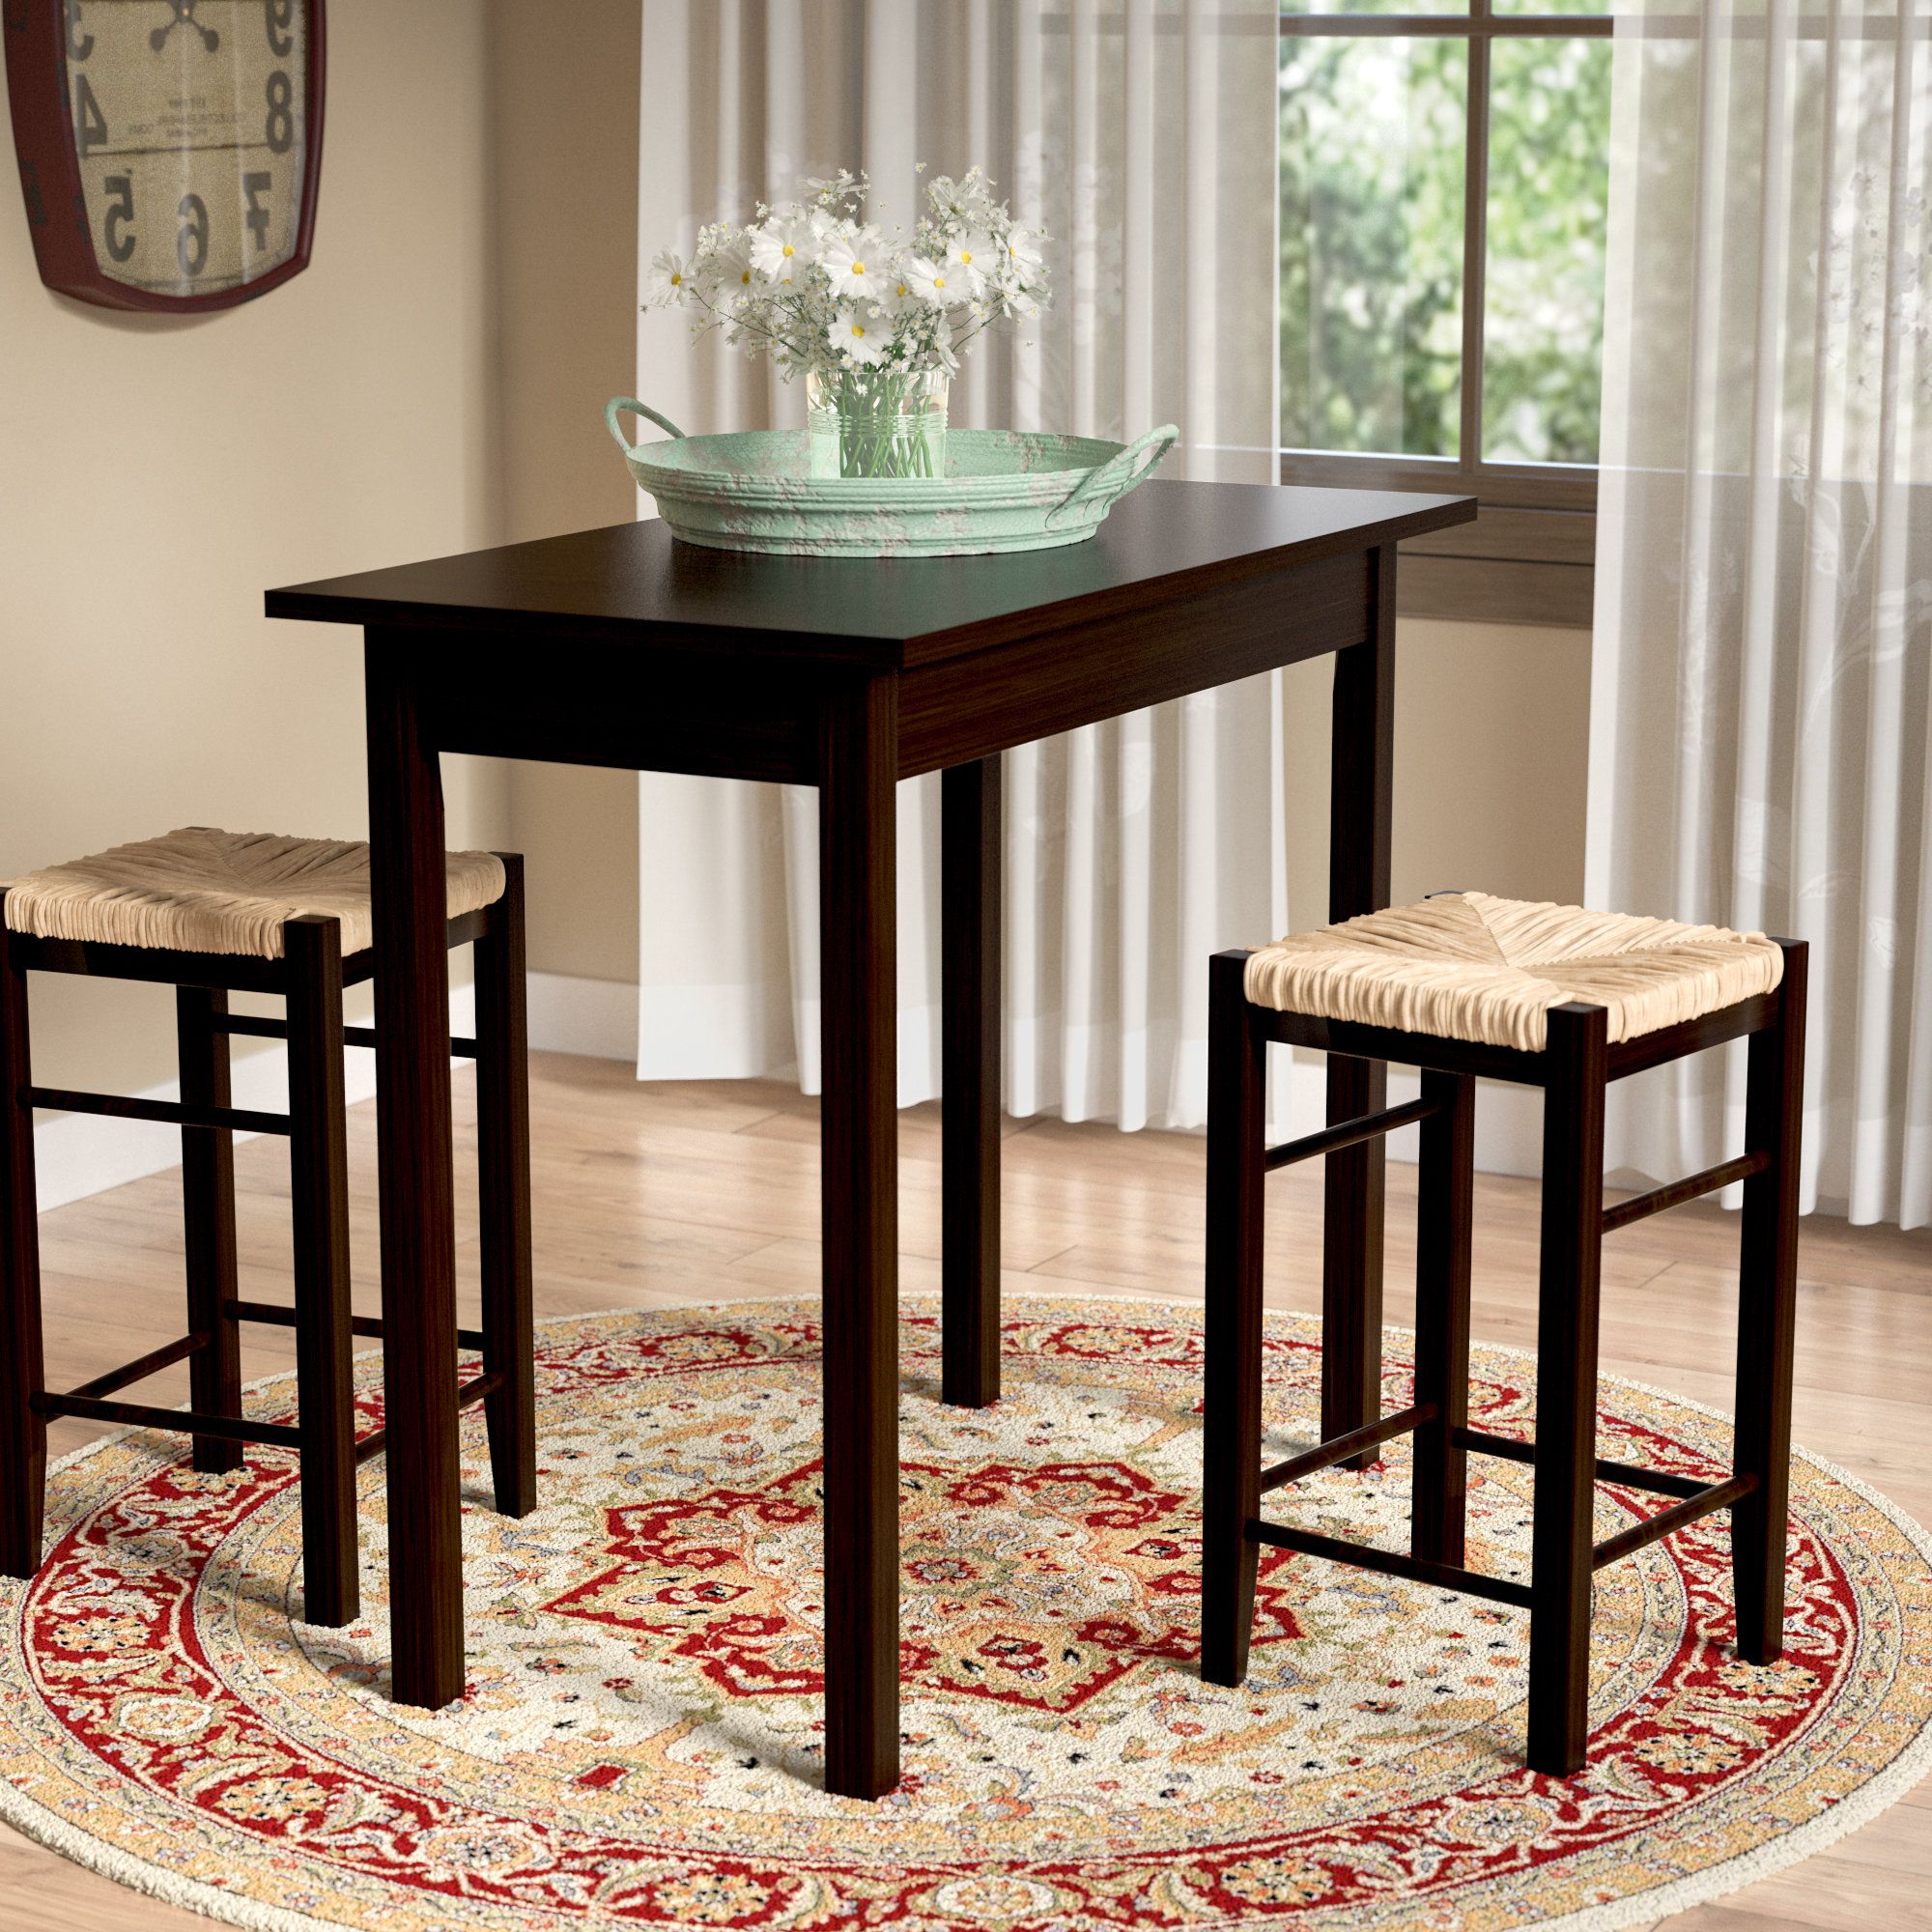 Tenney 3 Piece Counter Height Dining Sets With Latest Tenney 3 Piece Counter Height Dining Set (View 1 of 20)